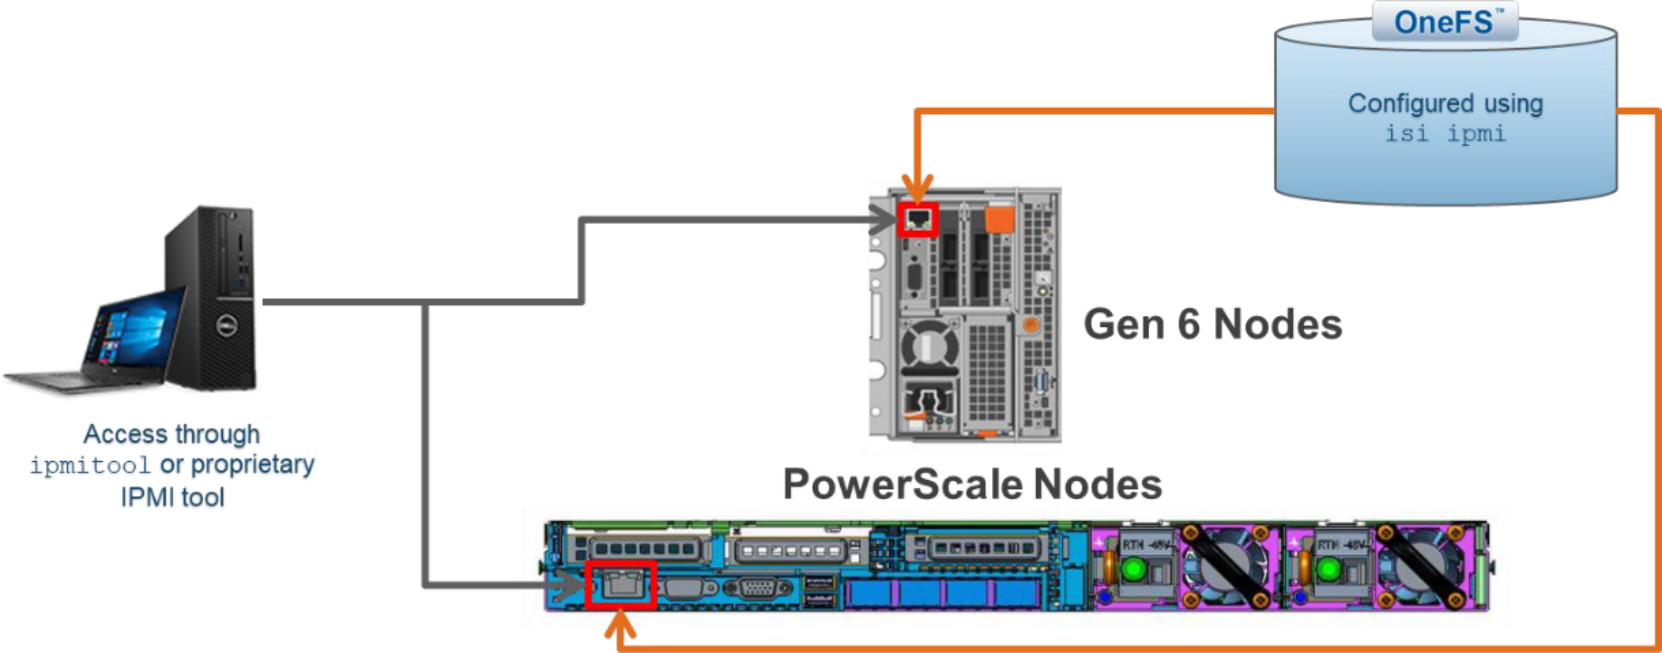 A figure illustrating the IPMI access for Gen 6 and PowerScale nodes